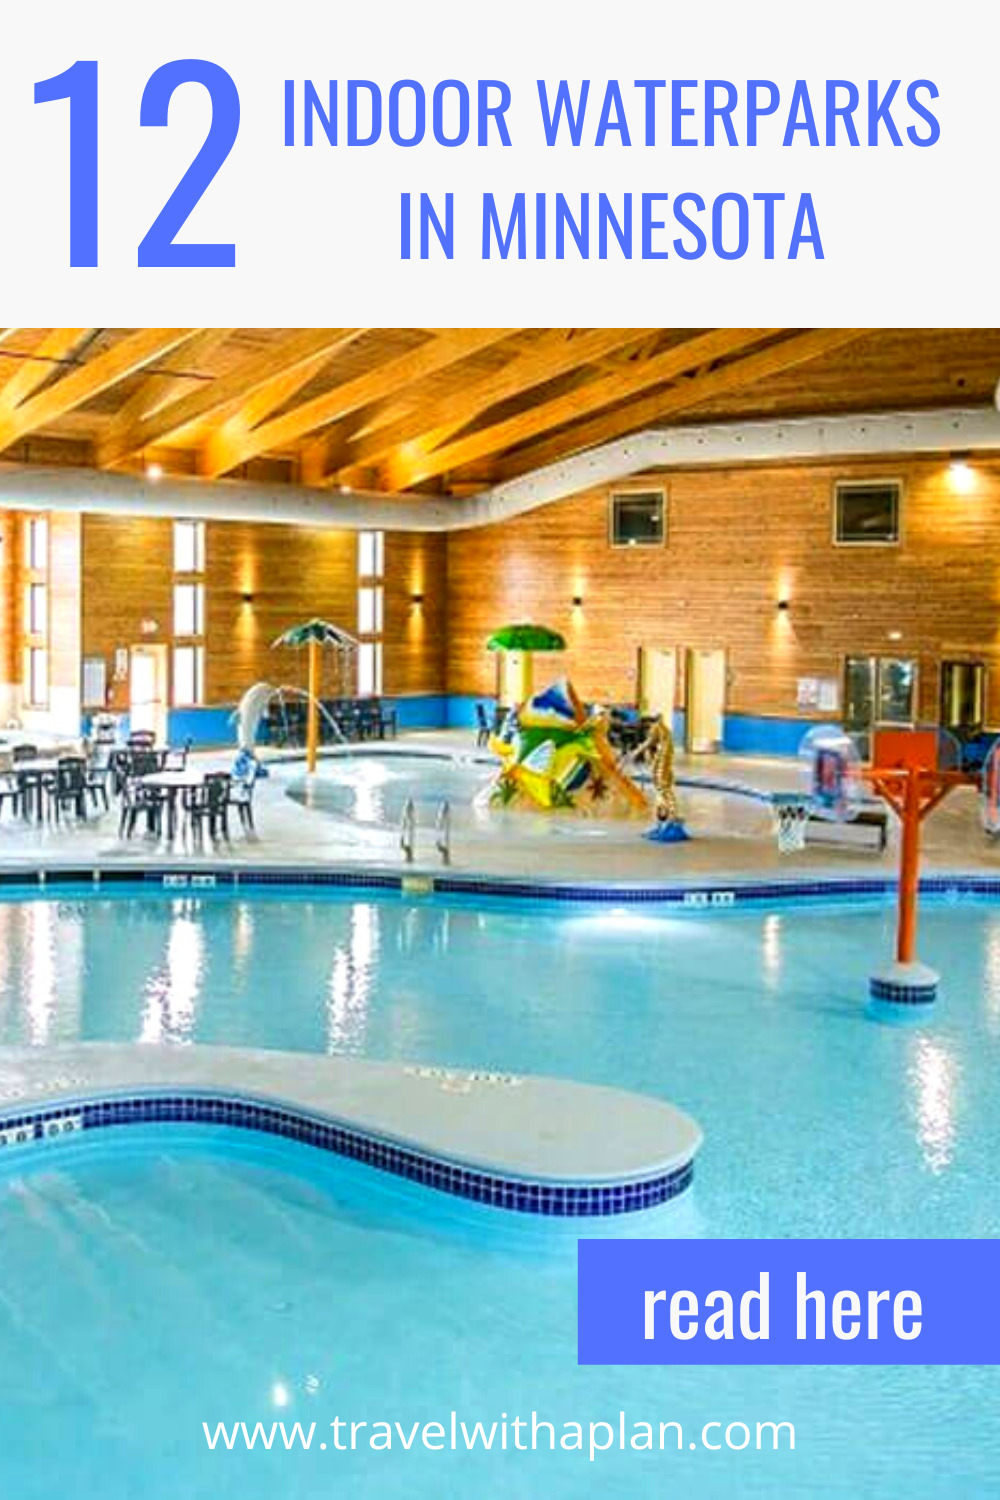 Here's a complete list of Minnesota indoor waterparks and waterpark hotels in MN!  Ward off the winter blues and heads inside to these great Minnesota attractions!  